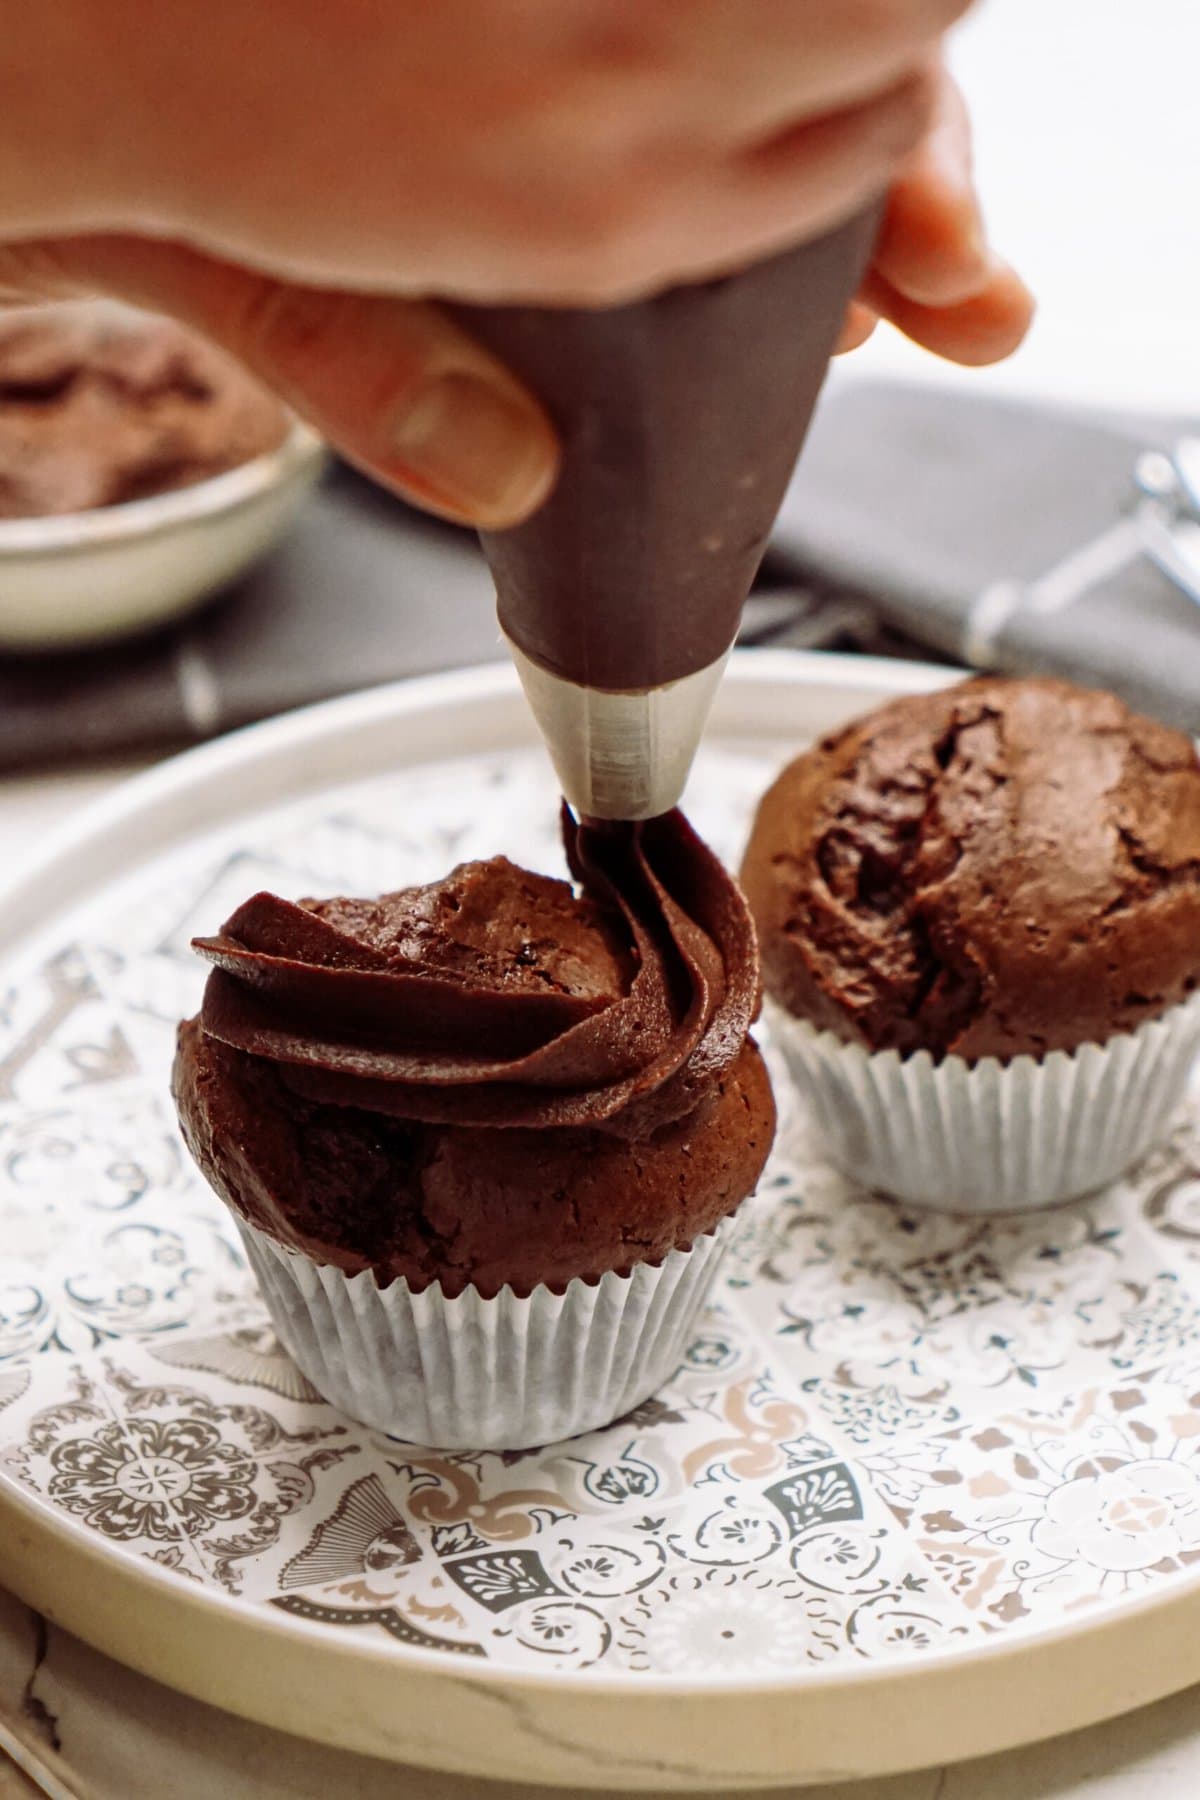 Applying chocolate frosting to a cupcake with a piping bag.